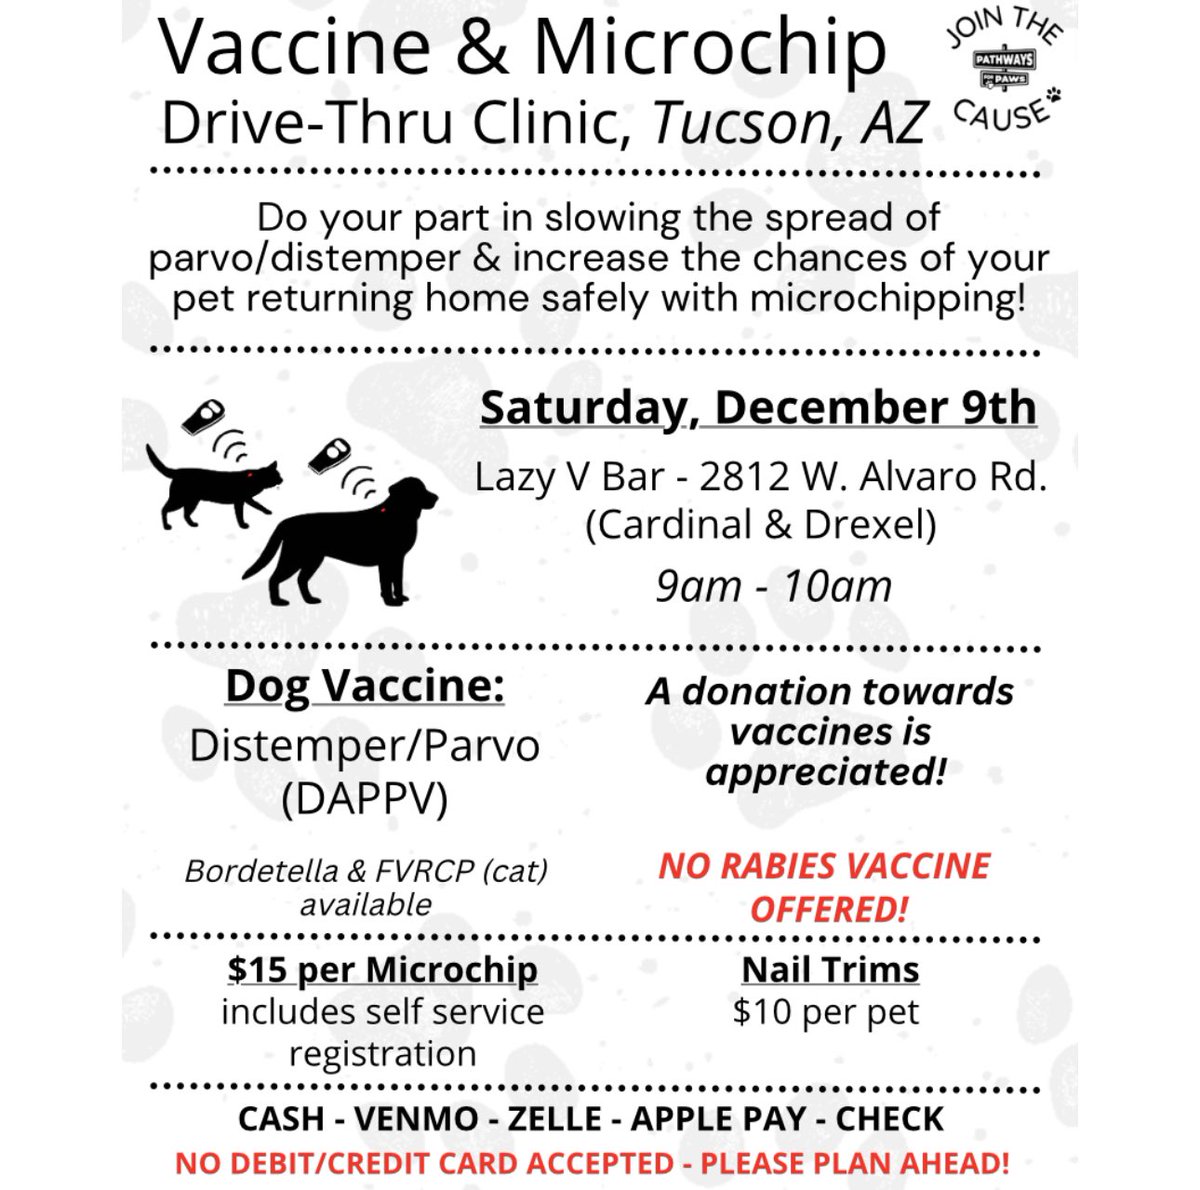 If you missed our Drive-Thru Vaccine & Microchip Clinic this evening, we will be at the Lazy V Bar this Saturday, December 9th from 9a-10a 🐾 Please remember to keep yourselves & your pets inside your vehicle for everyone’s safety! Please plan ahead, no excuses! @whatsuptucson